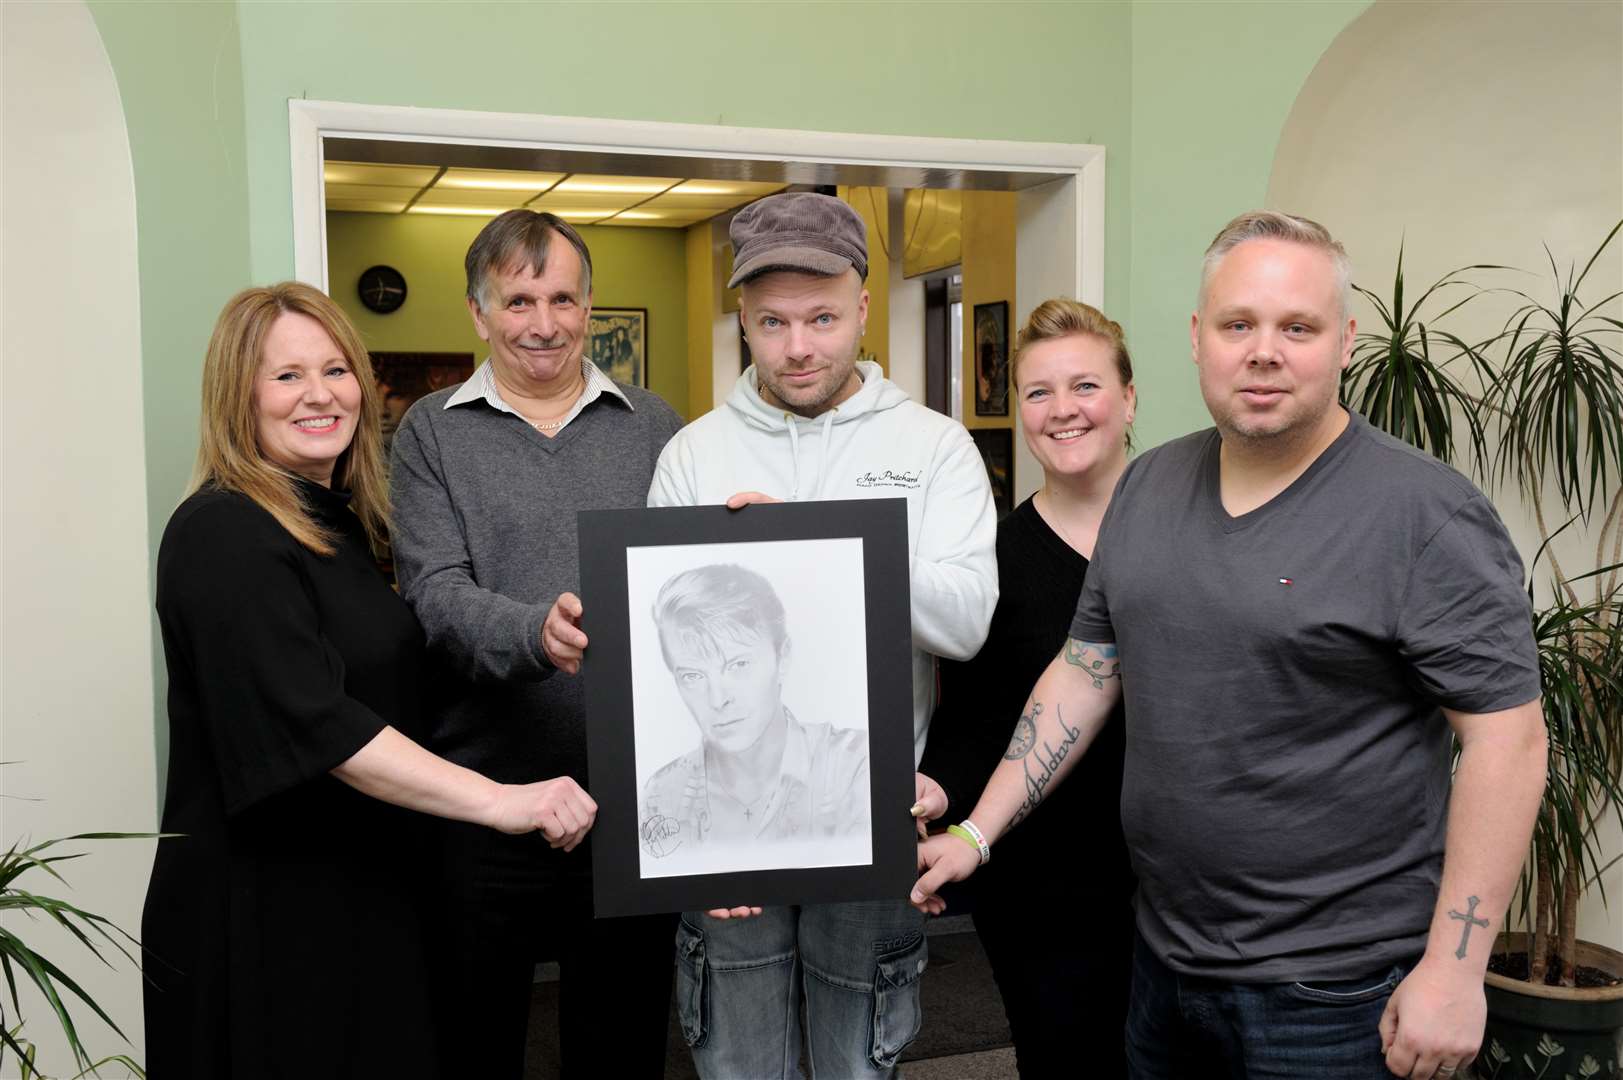 (L-R) Sue Terry, who helped Mike win the bid on ebay, Mike Trout, who won the picture, artist Jay Pritchard, Sam & Warren Mowle.